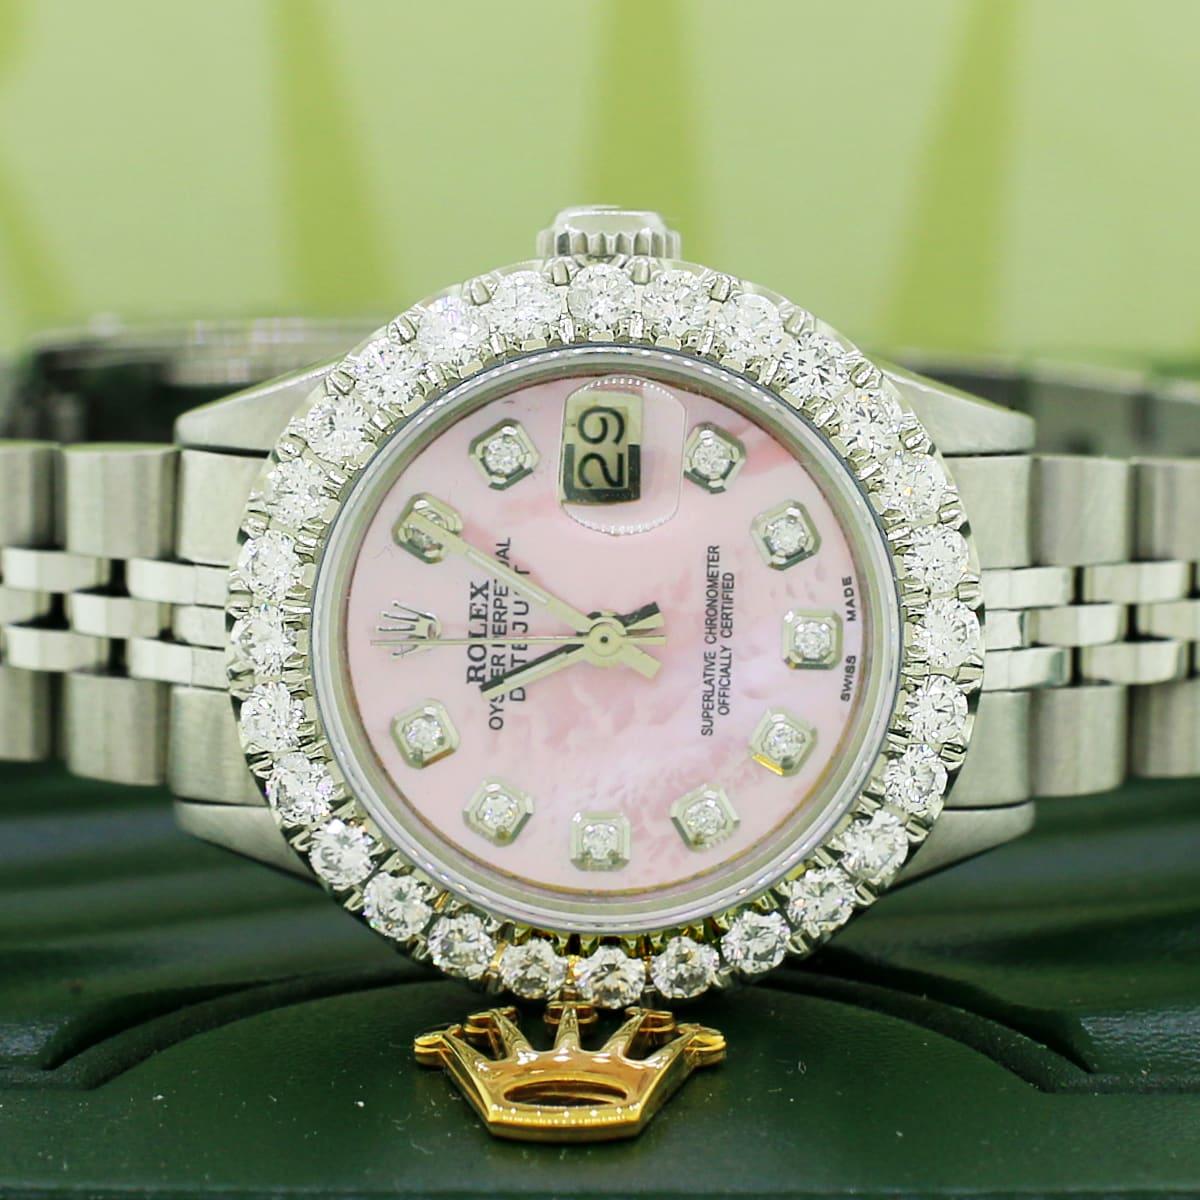 Rolex Datejust Ladies Automatic Steel Jubilee Watch, 1.96 Carat Diamond Bezel In Excellent Condition For Sale In New York, NY